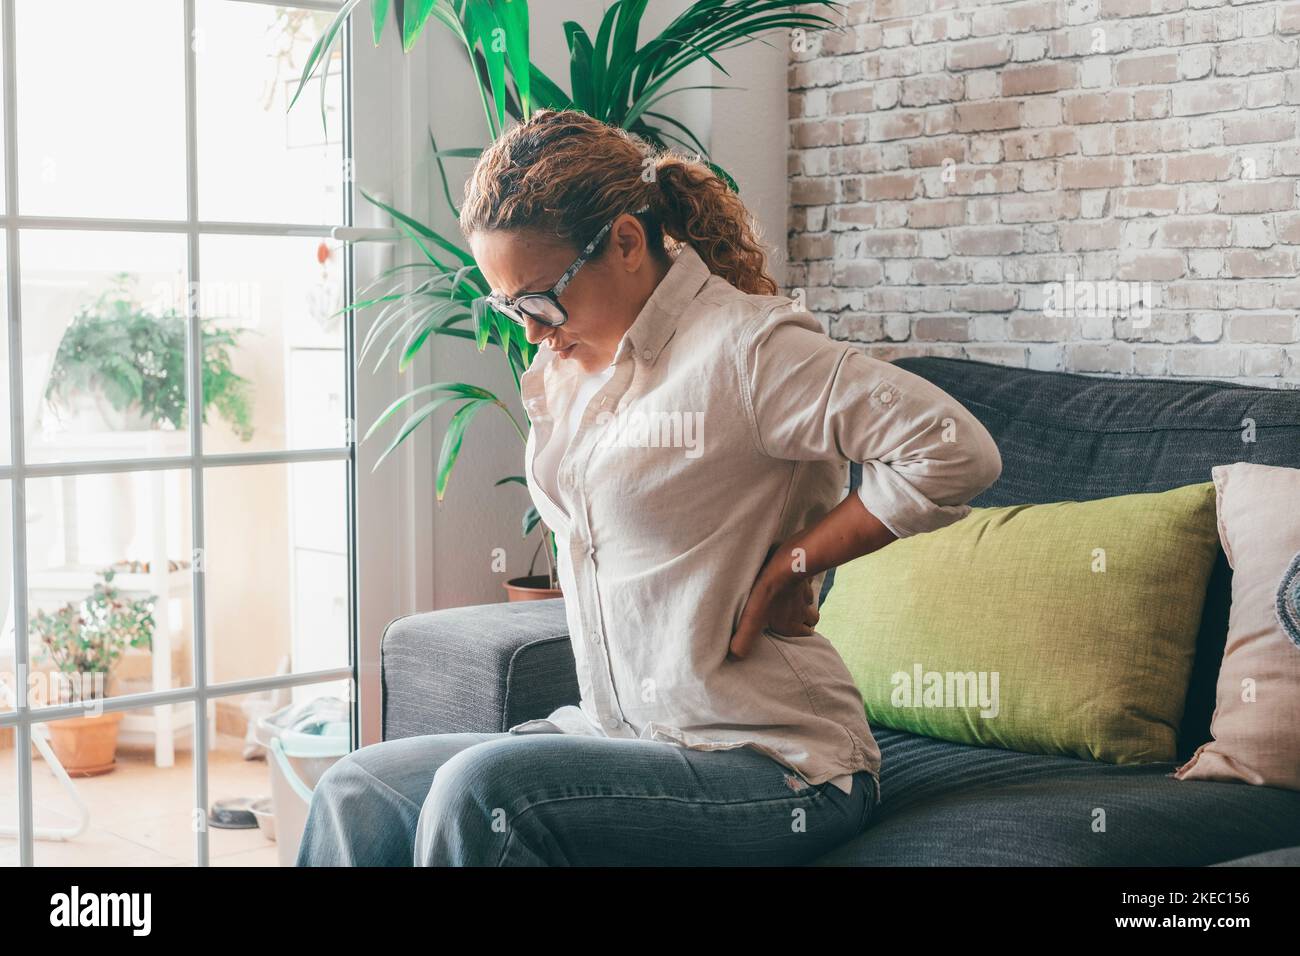 Tired young woman suffering from severe backache sitting on sofa in the living room of house, Caucasian female sitting on couch touching lower back feeling discomfort at home Stock Photo